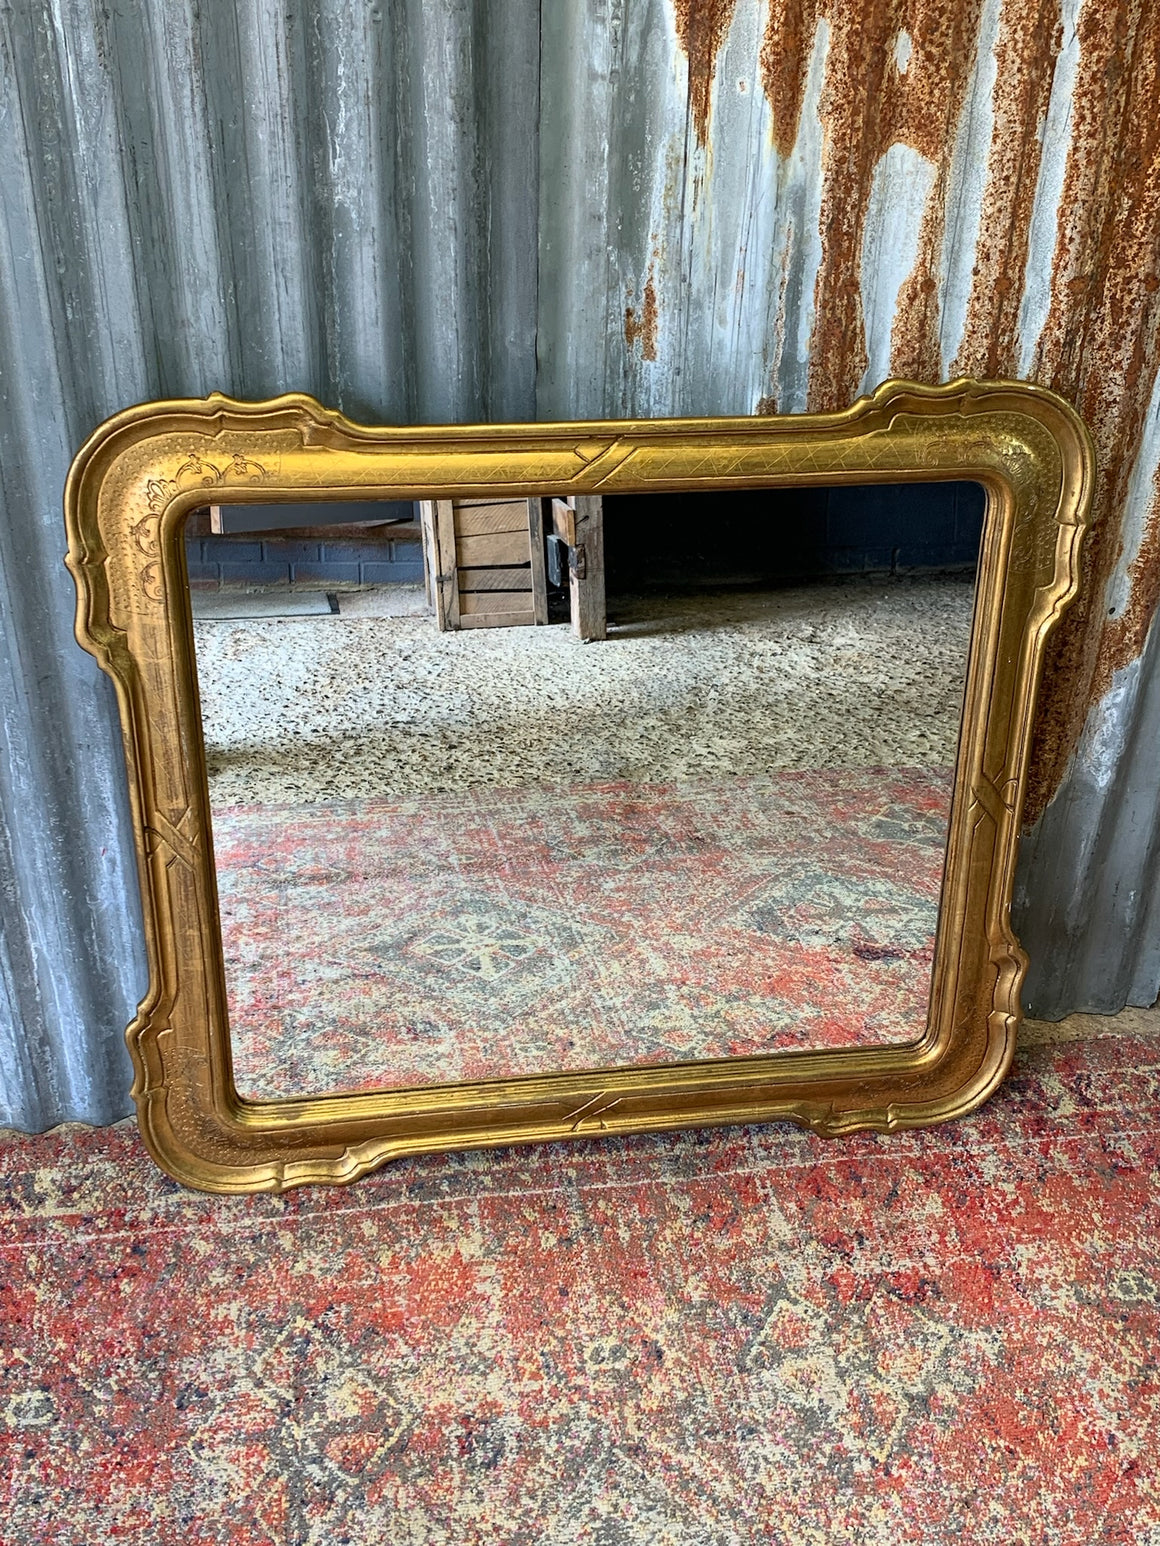 A large giltwood wall mirror